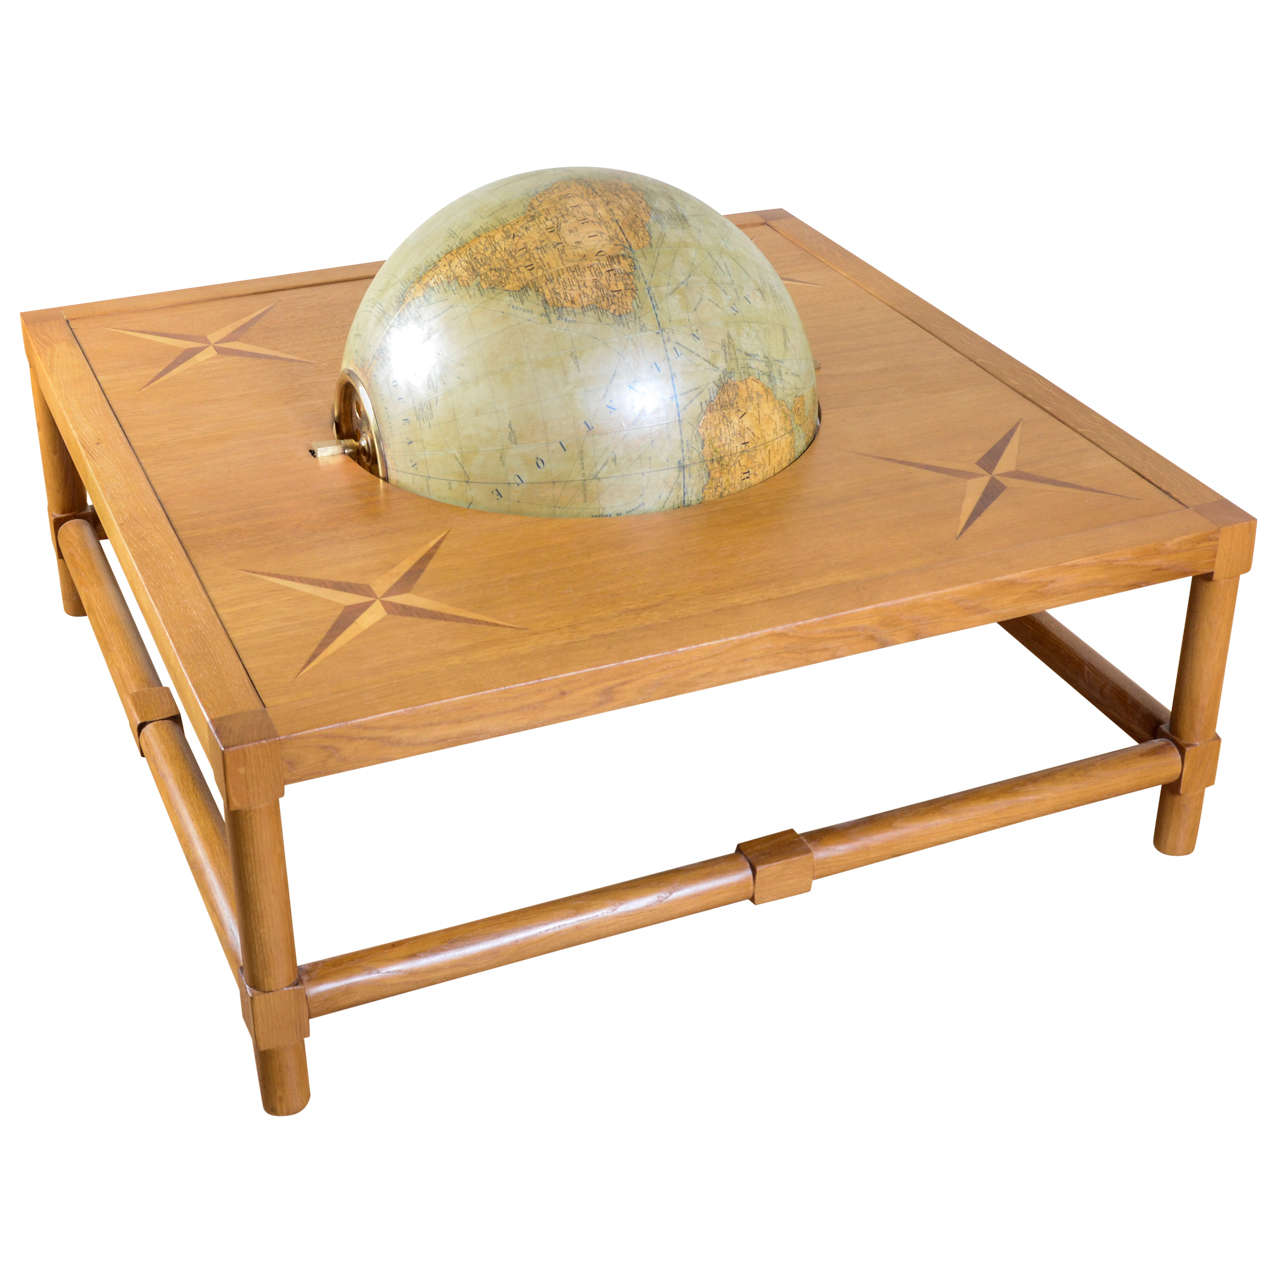 Circa 1948 Jacques Adnet Coffee Table For Sale